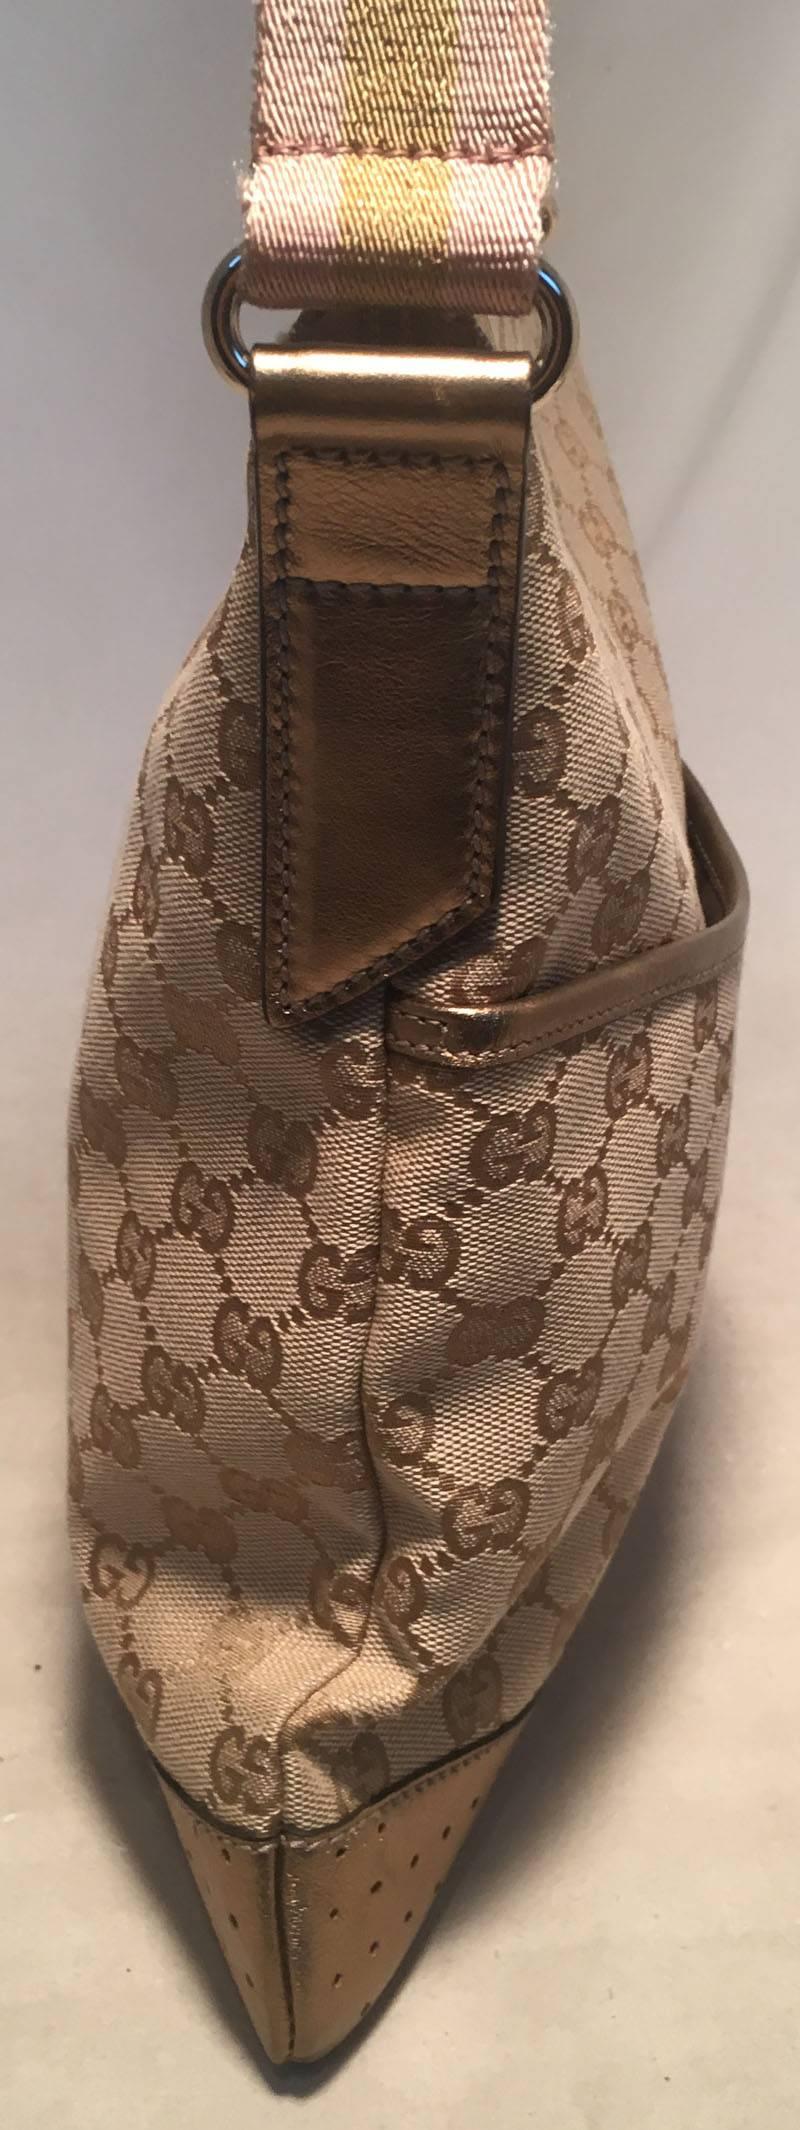 GORGEOUS Gucci medium messenger cross body bag in excellent condition.  Tan monogram canvas exterior trimmed with bronze leather and a pink and bronze striped adjustable shoulder strap.  Front slit pocket with snap closure for additional storage and